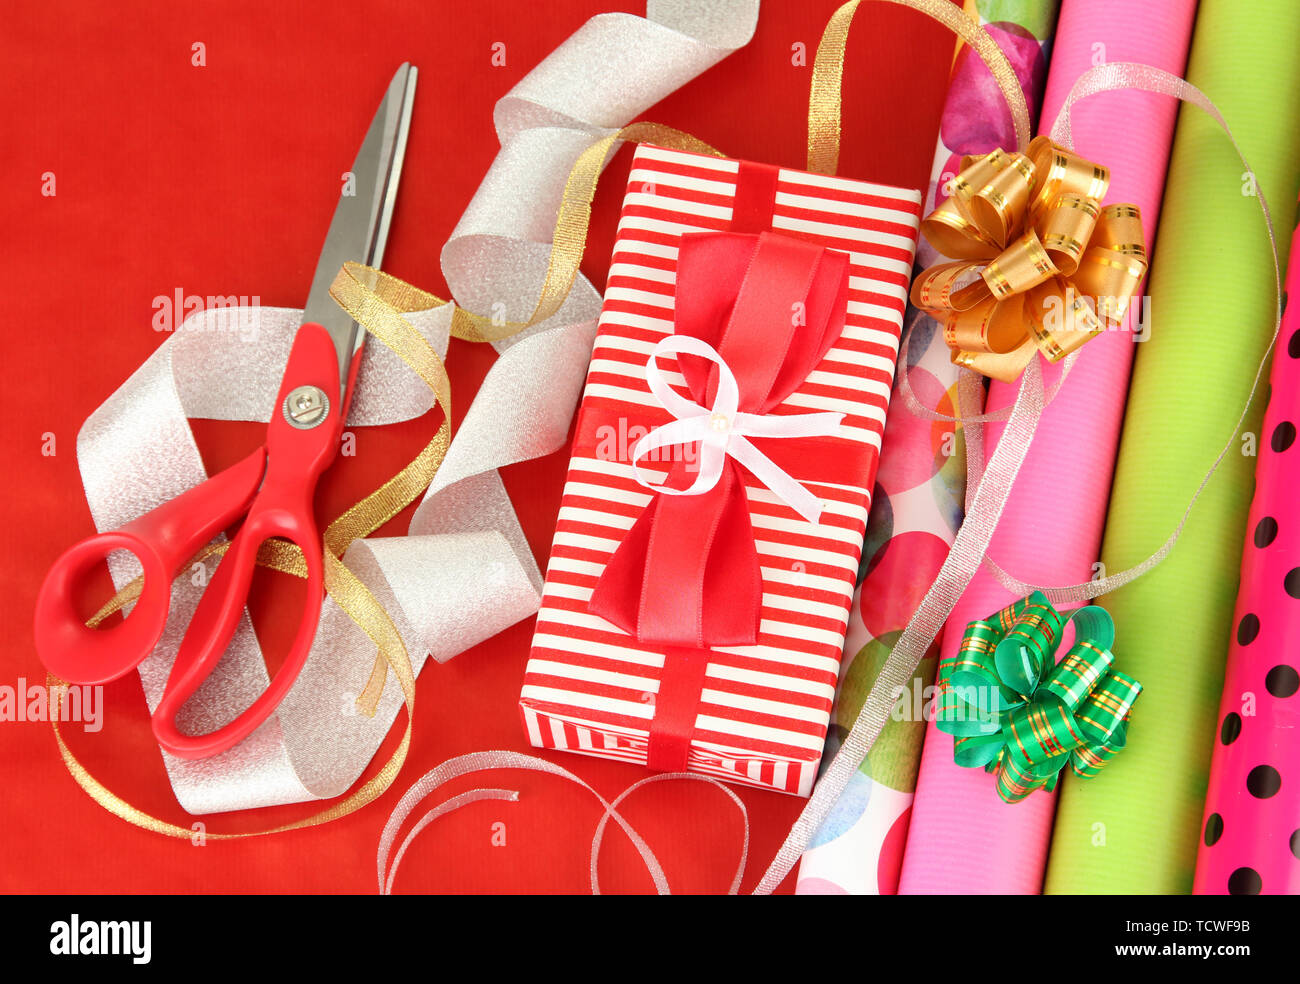 Rolls Of Christmas Wrapping Paper With Ribbons, Bows And Scissors